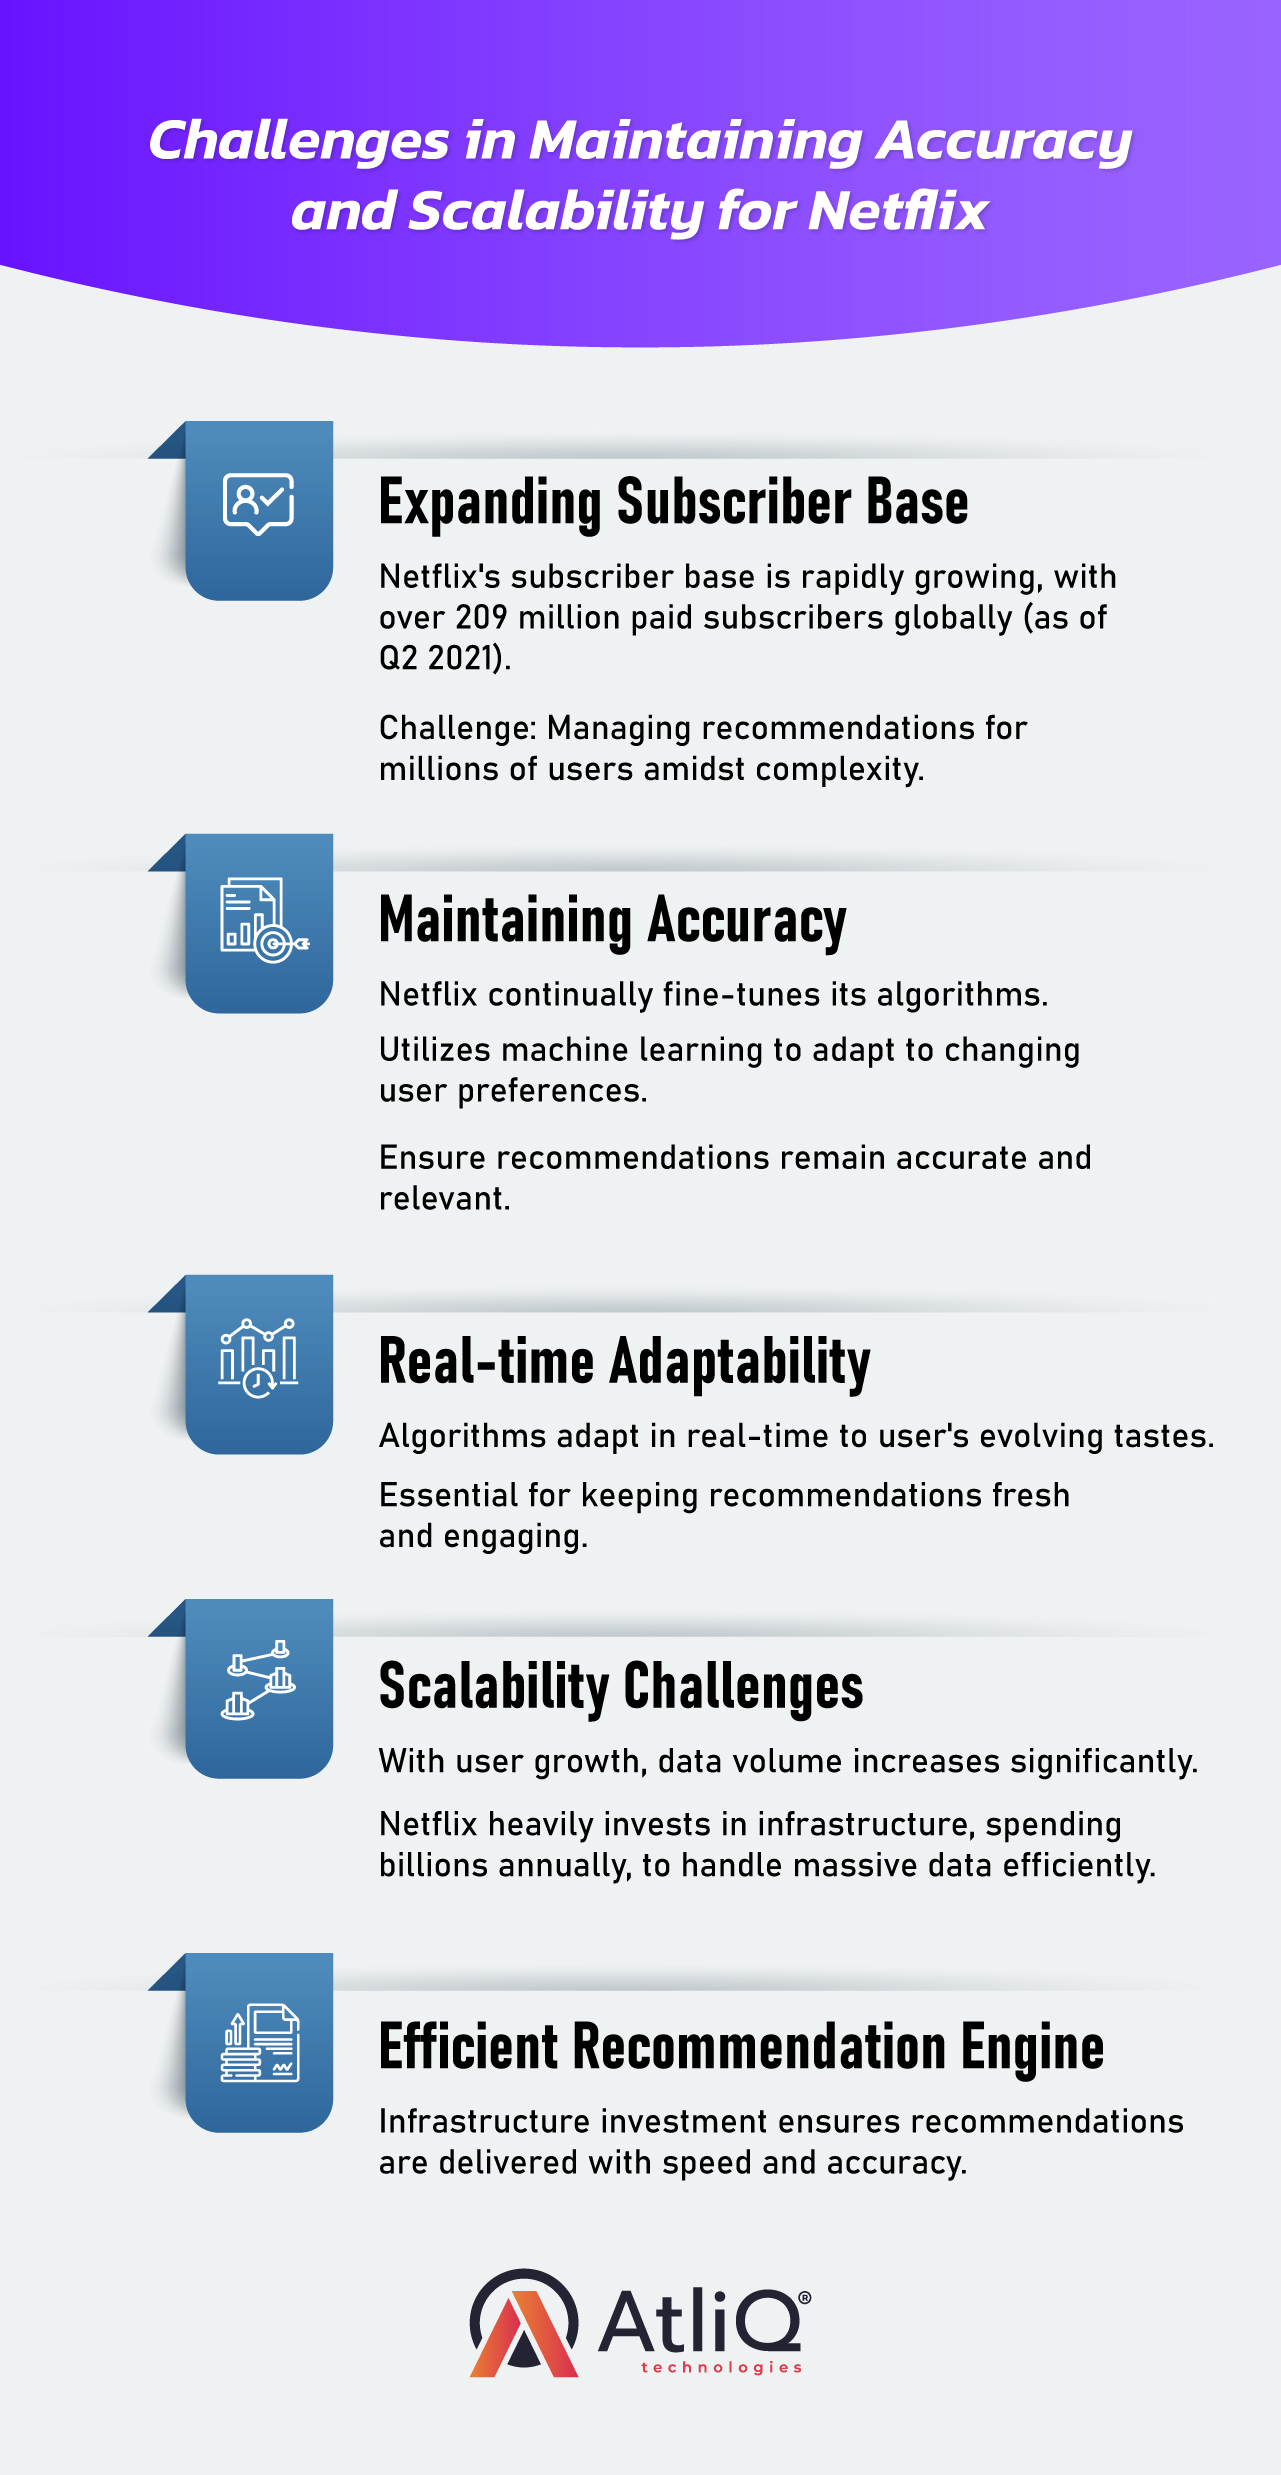 Challenges in Maintaining Accuracy and Scalability for Netflix